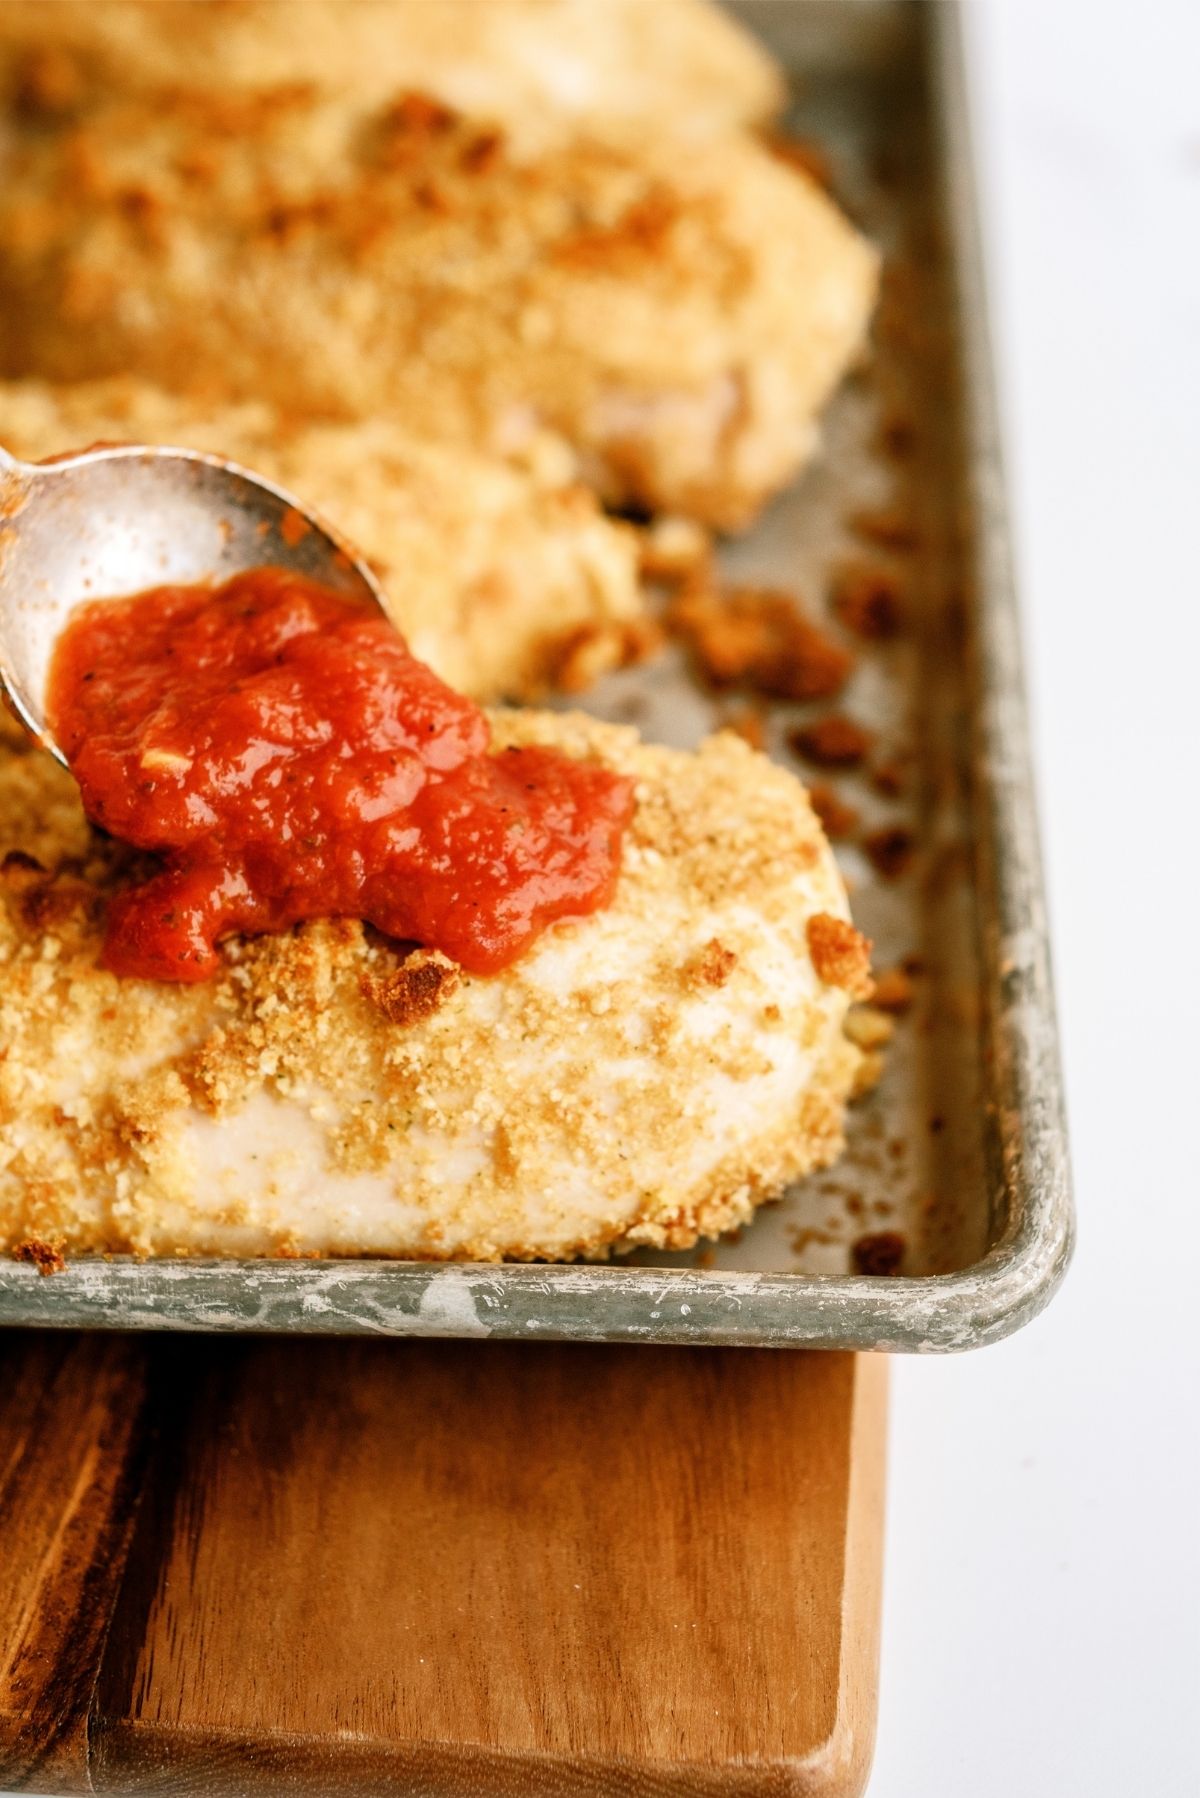 Adding sauce on top of baked parmesan chicken